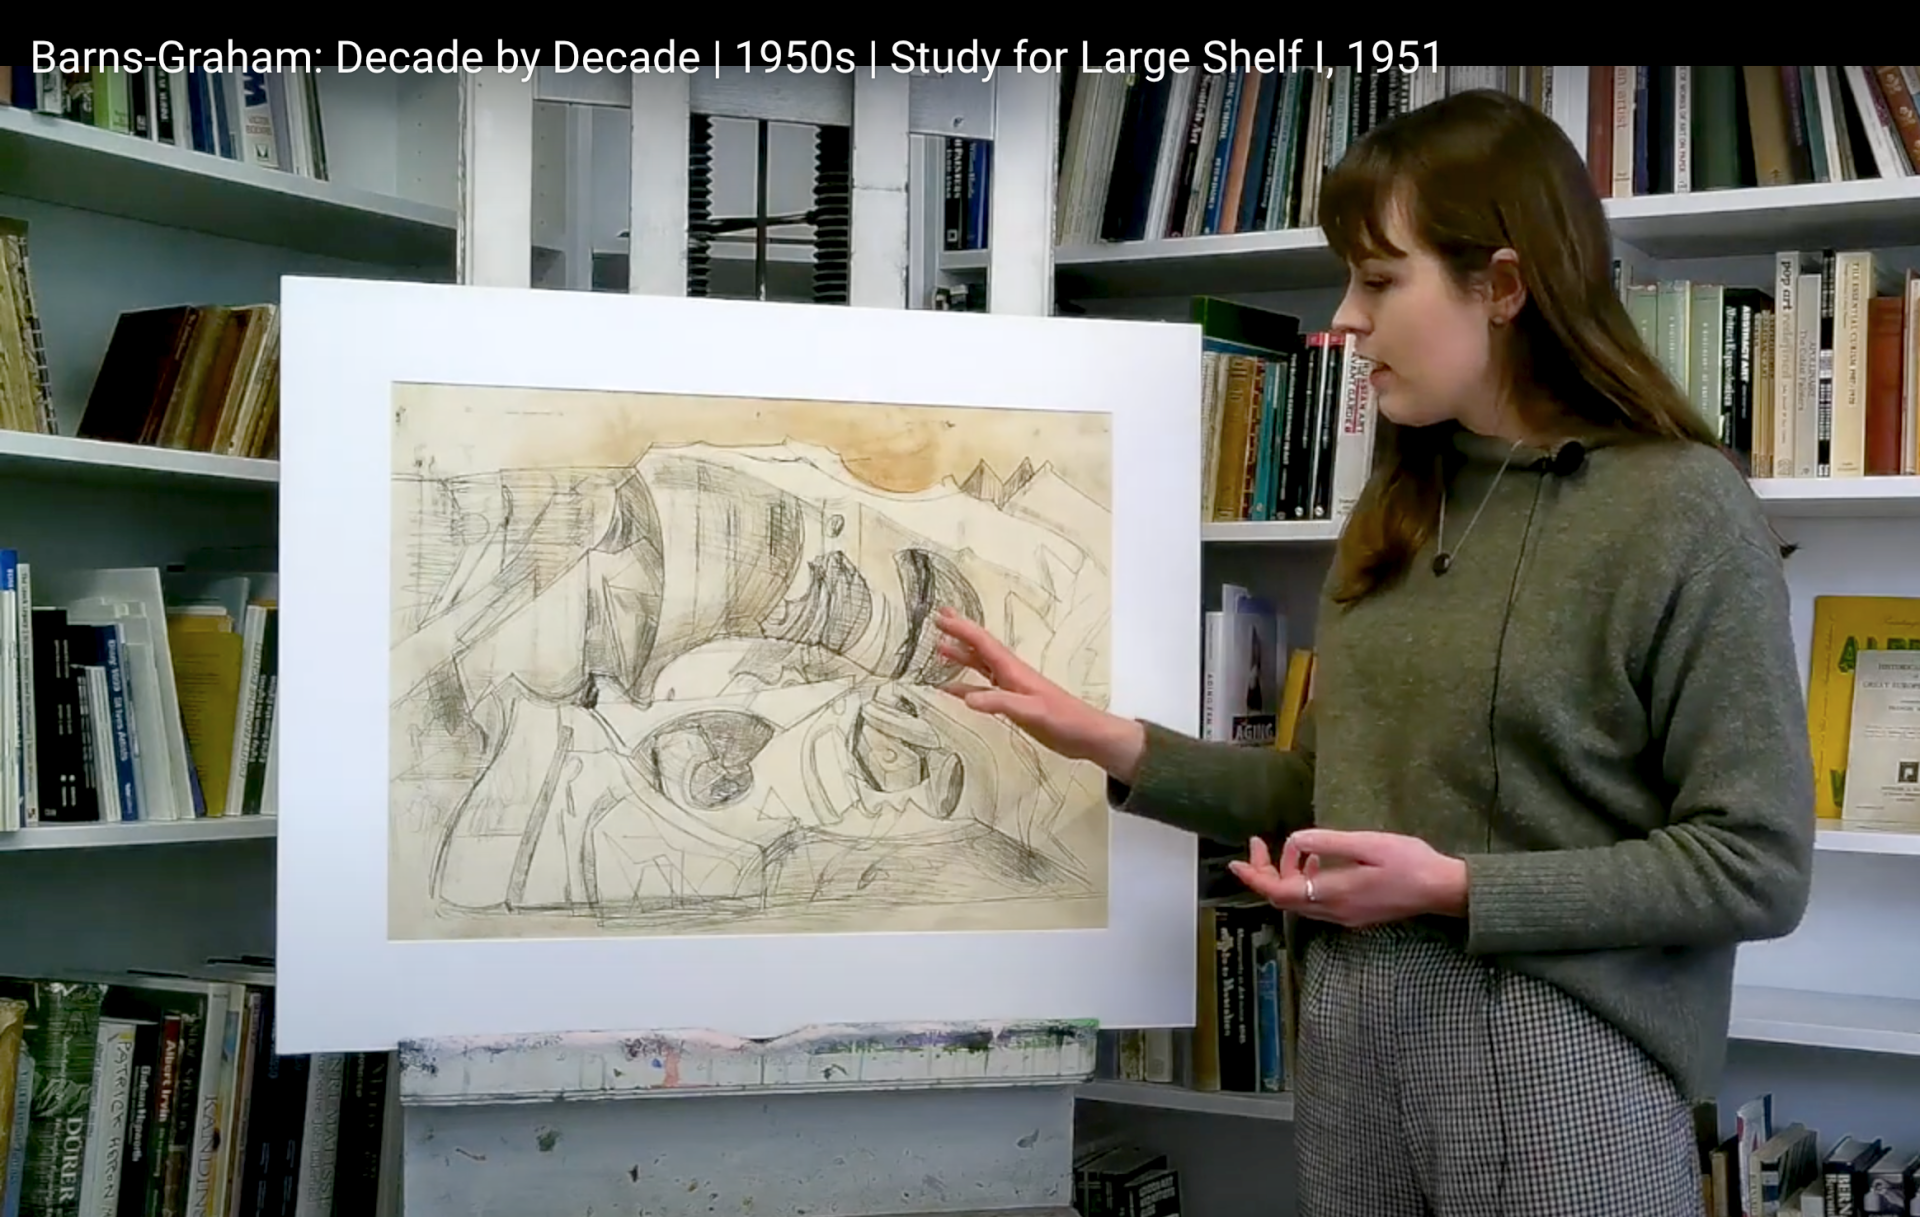 Artist  standing next to drawing, pointing, in a library